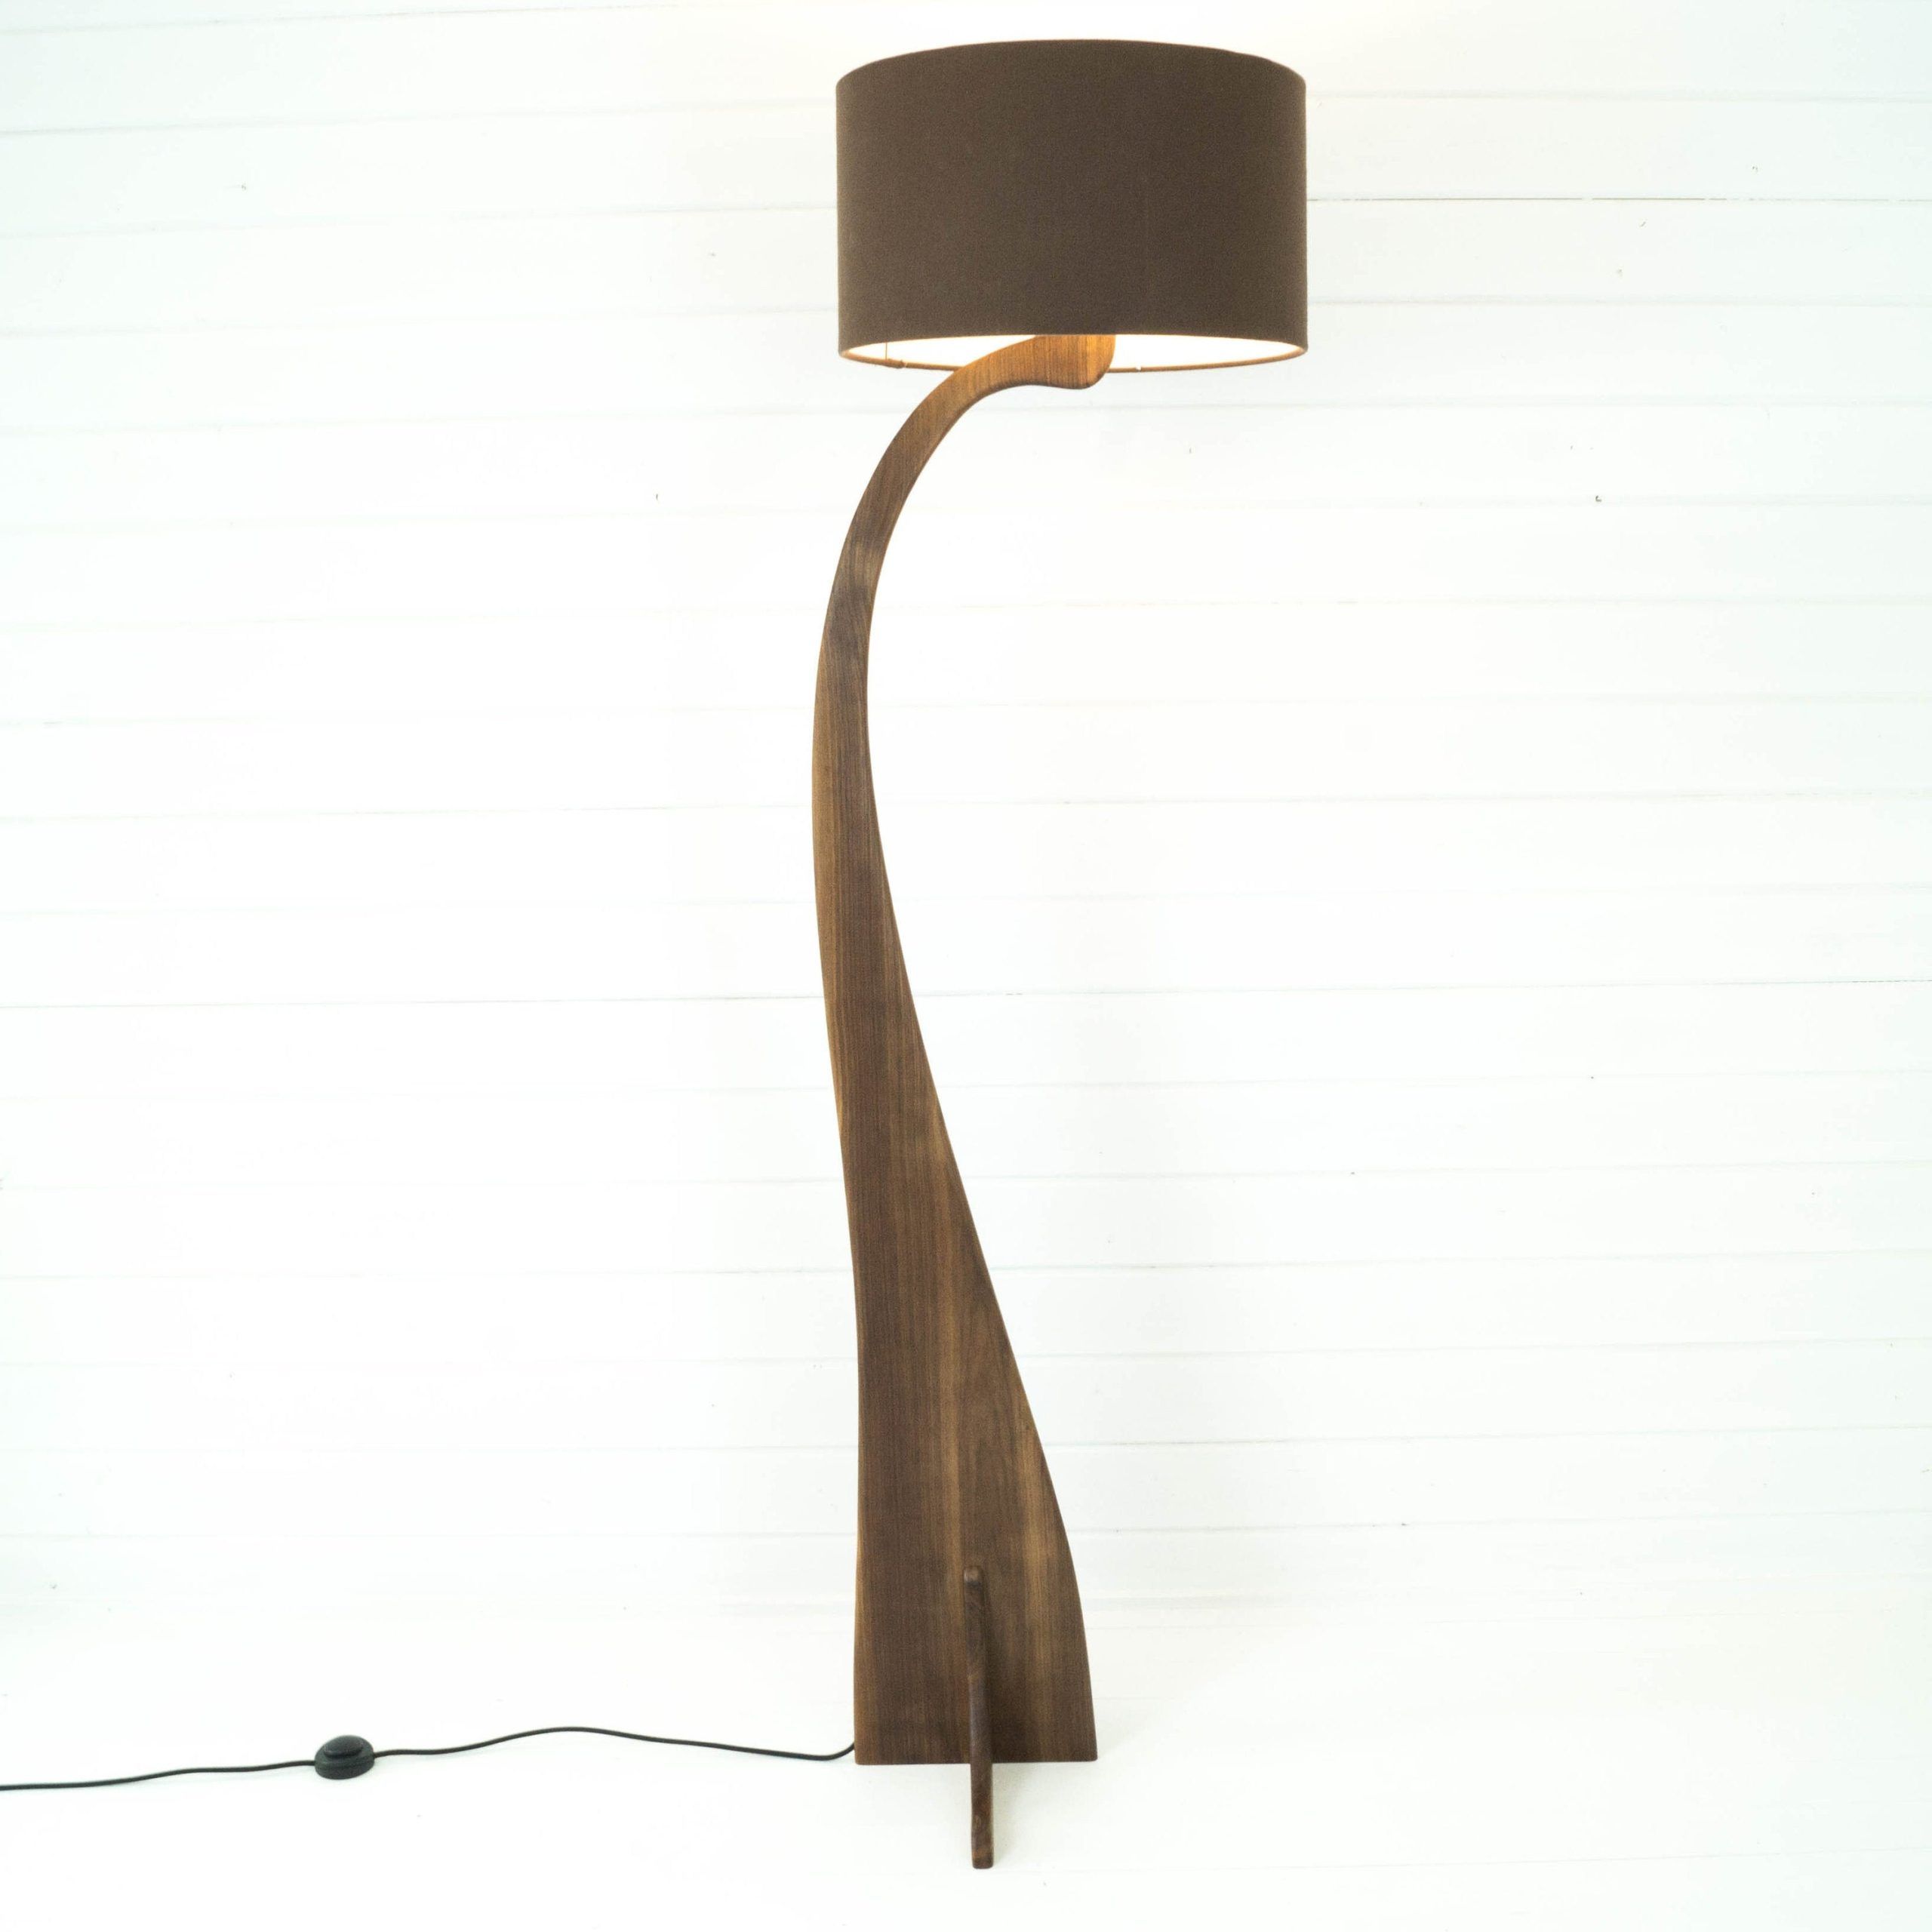 Walnut Floor Lamp Solid Wood Unique Contemporary Design – Etsy Uk Pertaining To Well Known Walnut Floor Lamps (View 3 of 15)